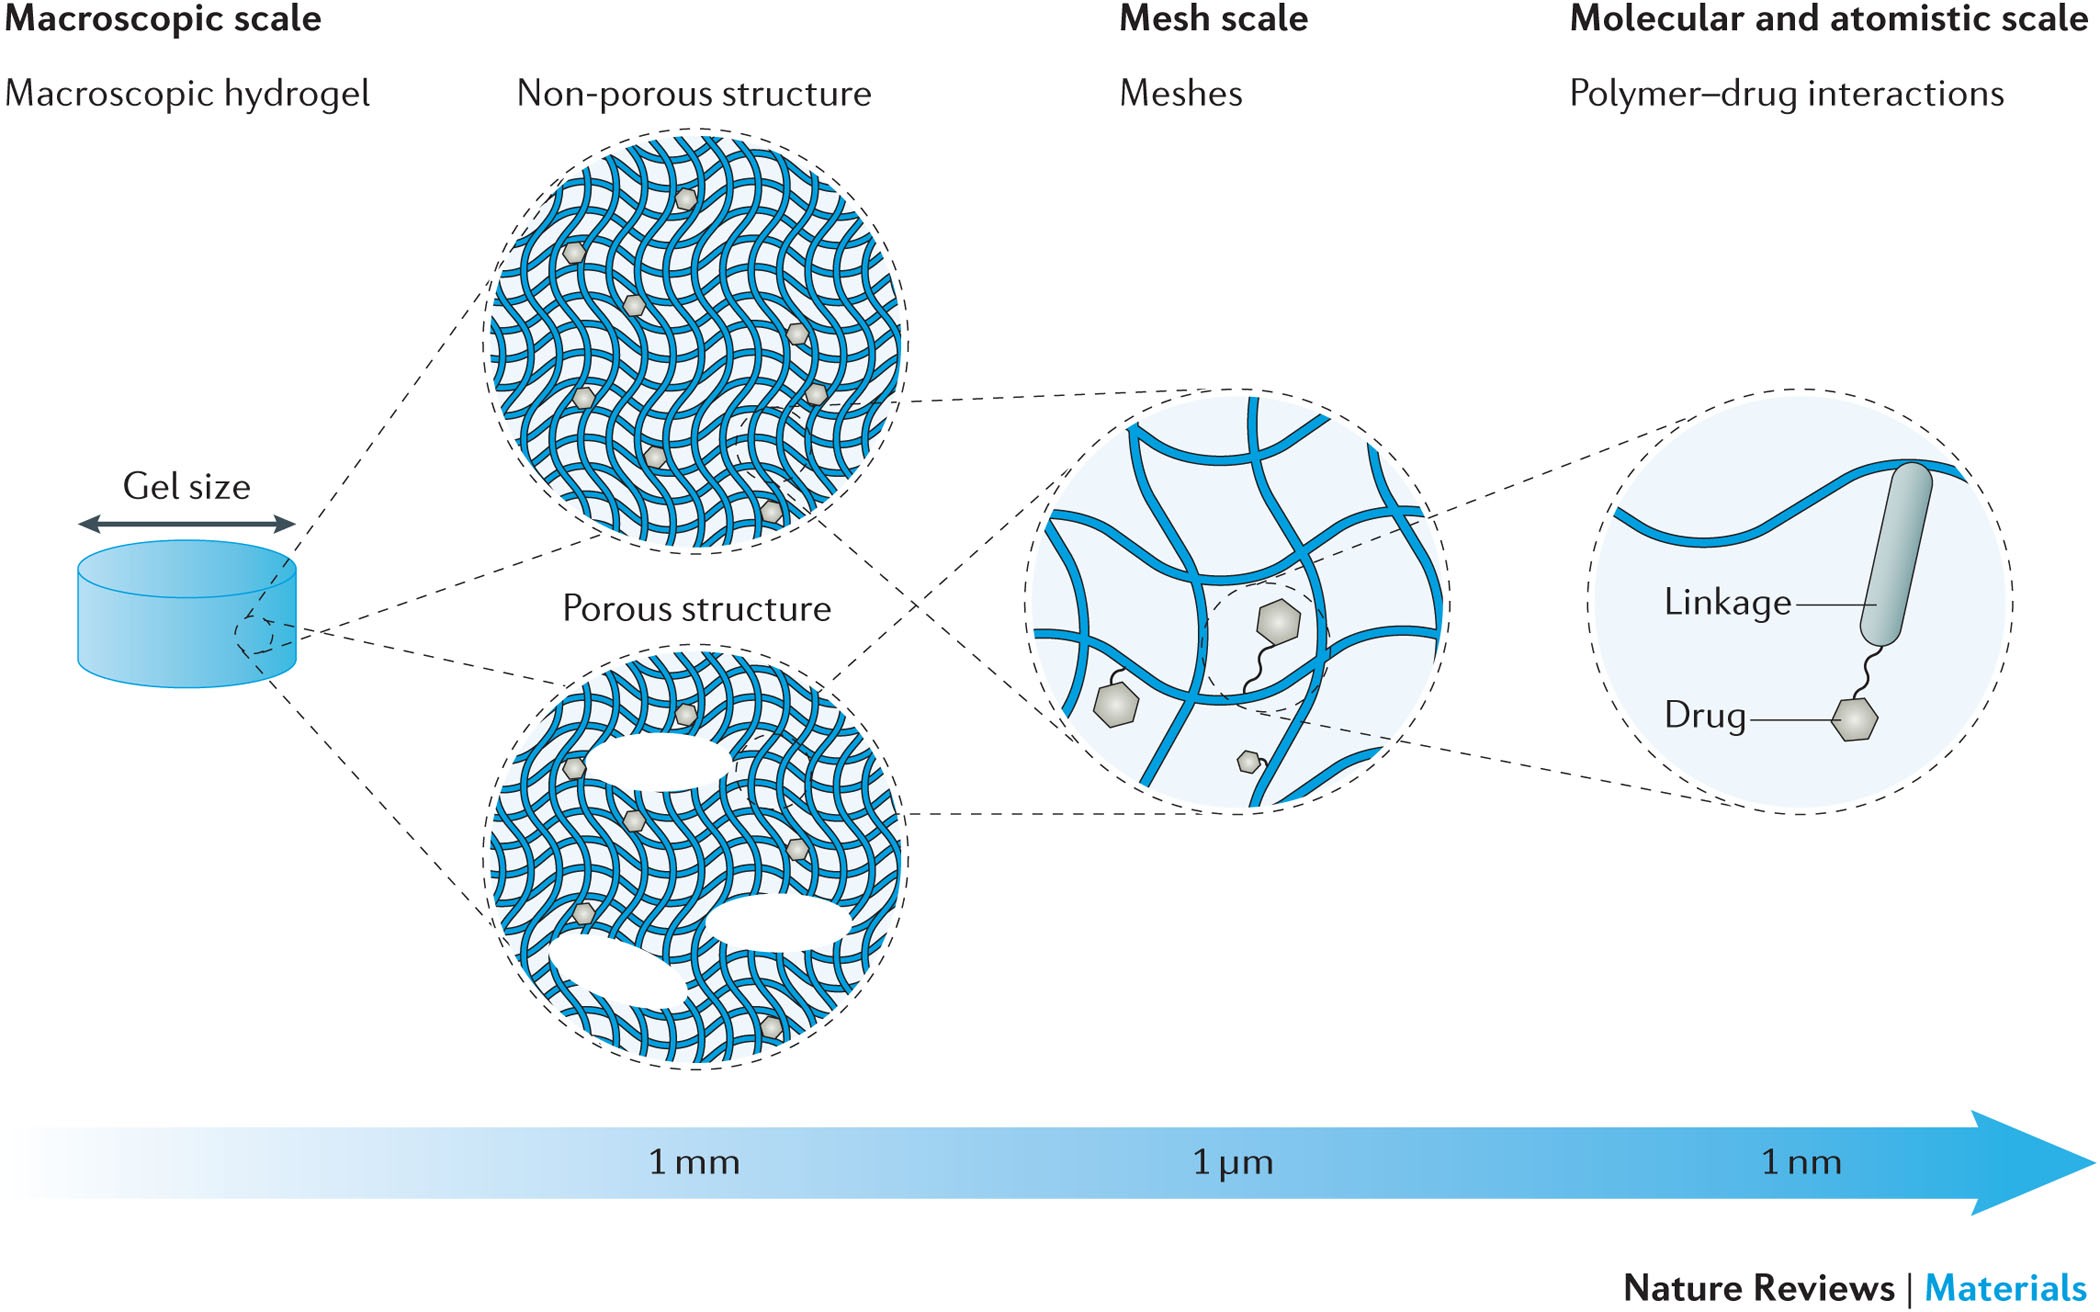 hydrogels for drug delivery | Nature Reviews Materials